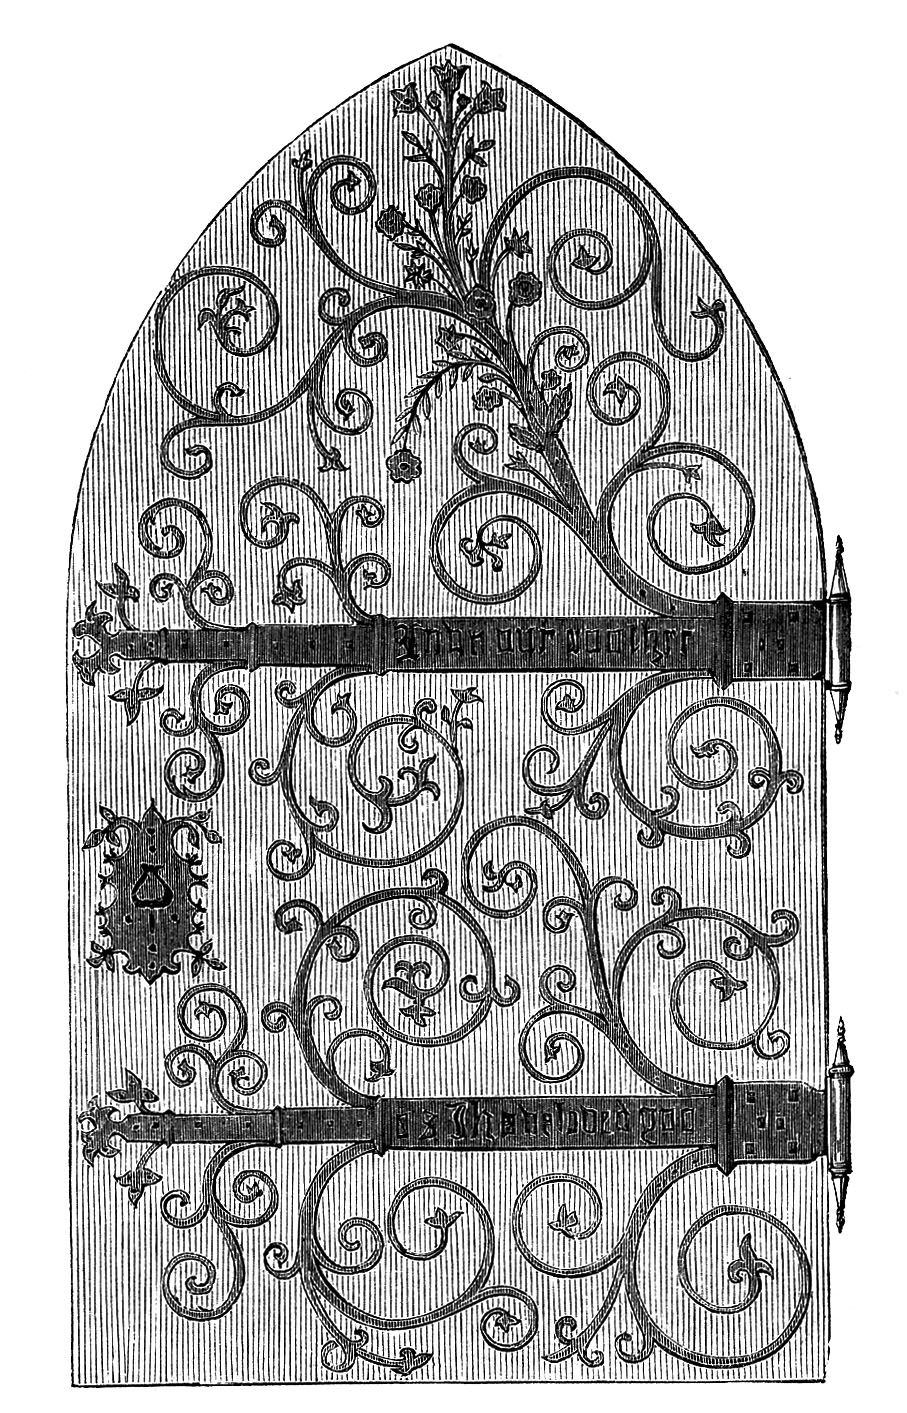 cage clipart medieval